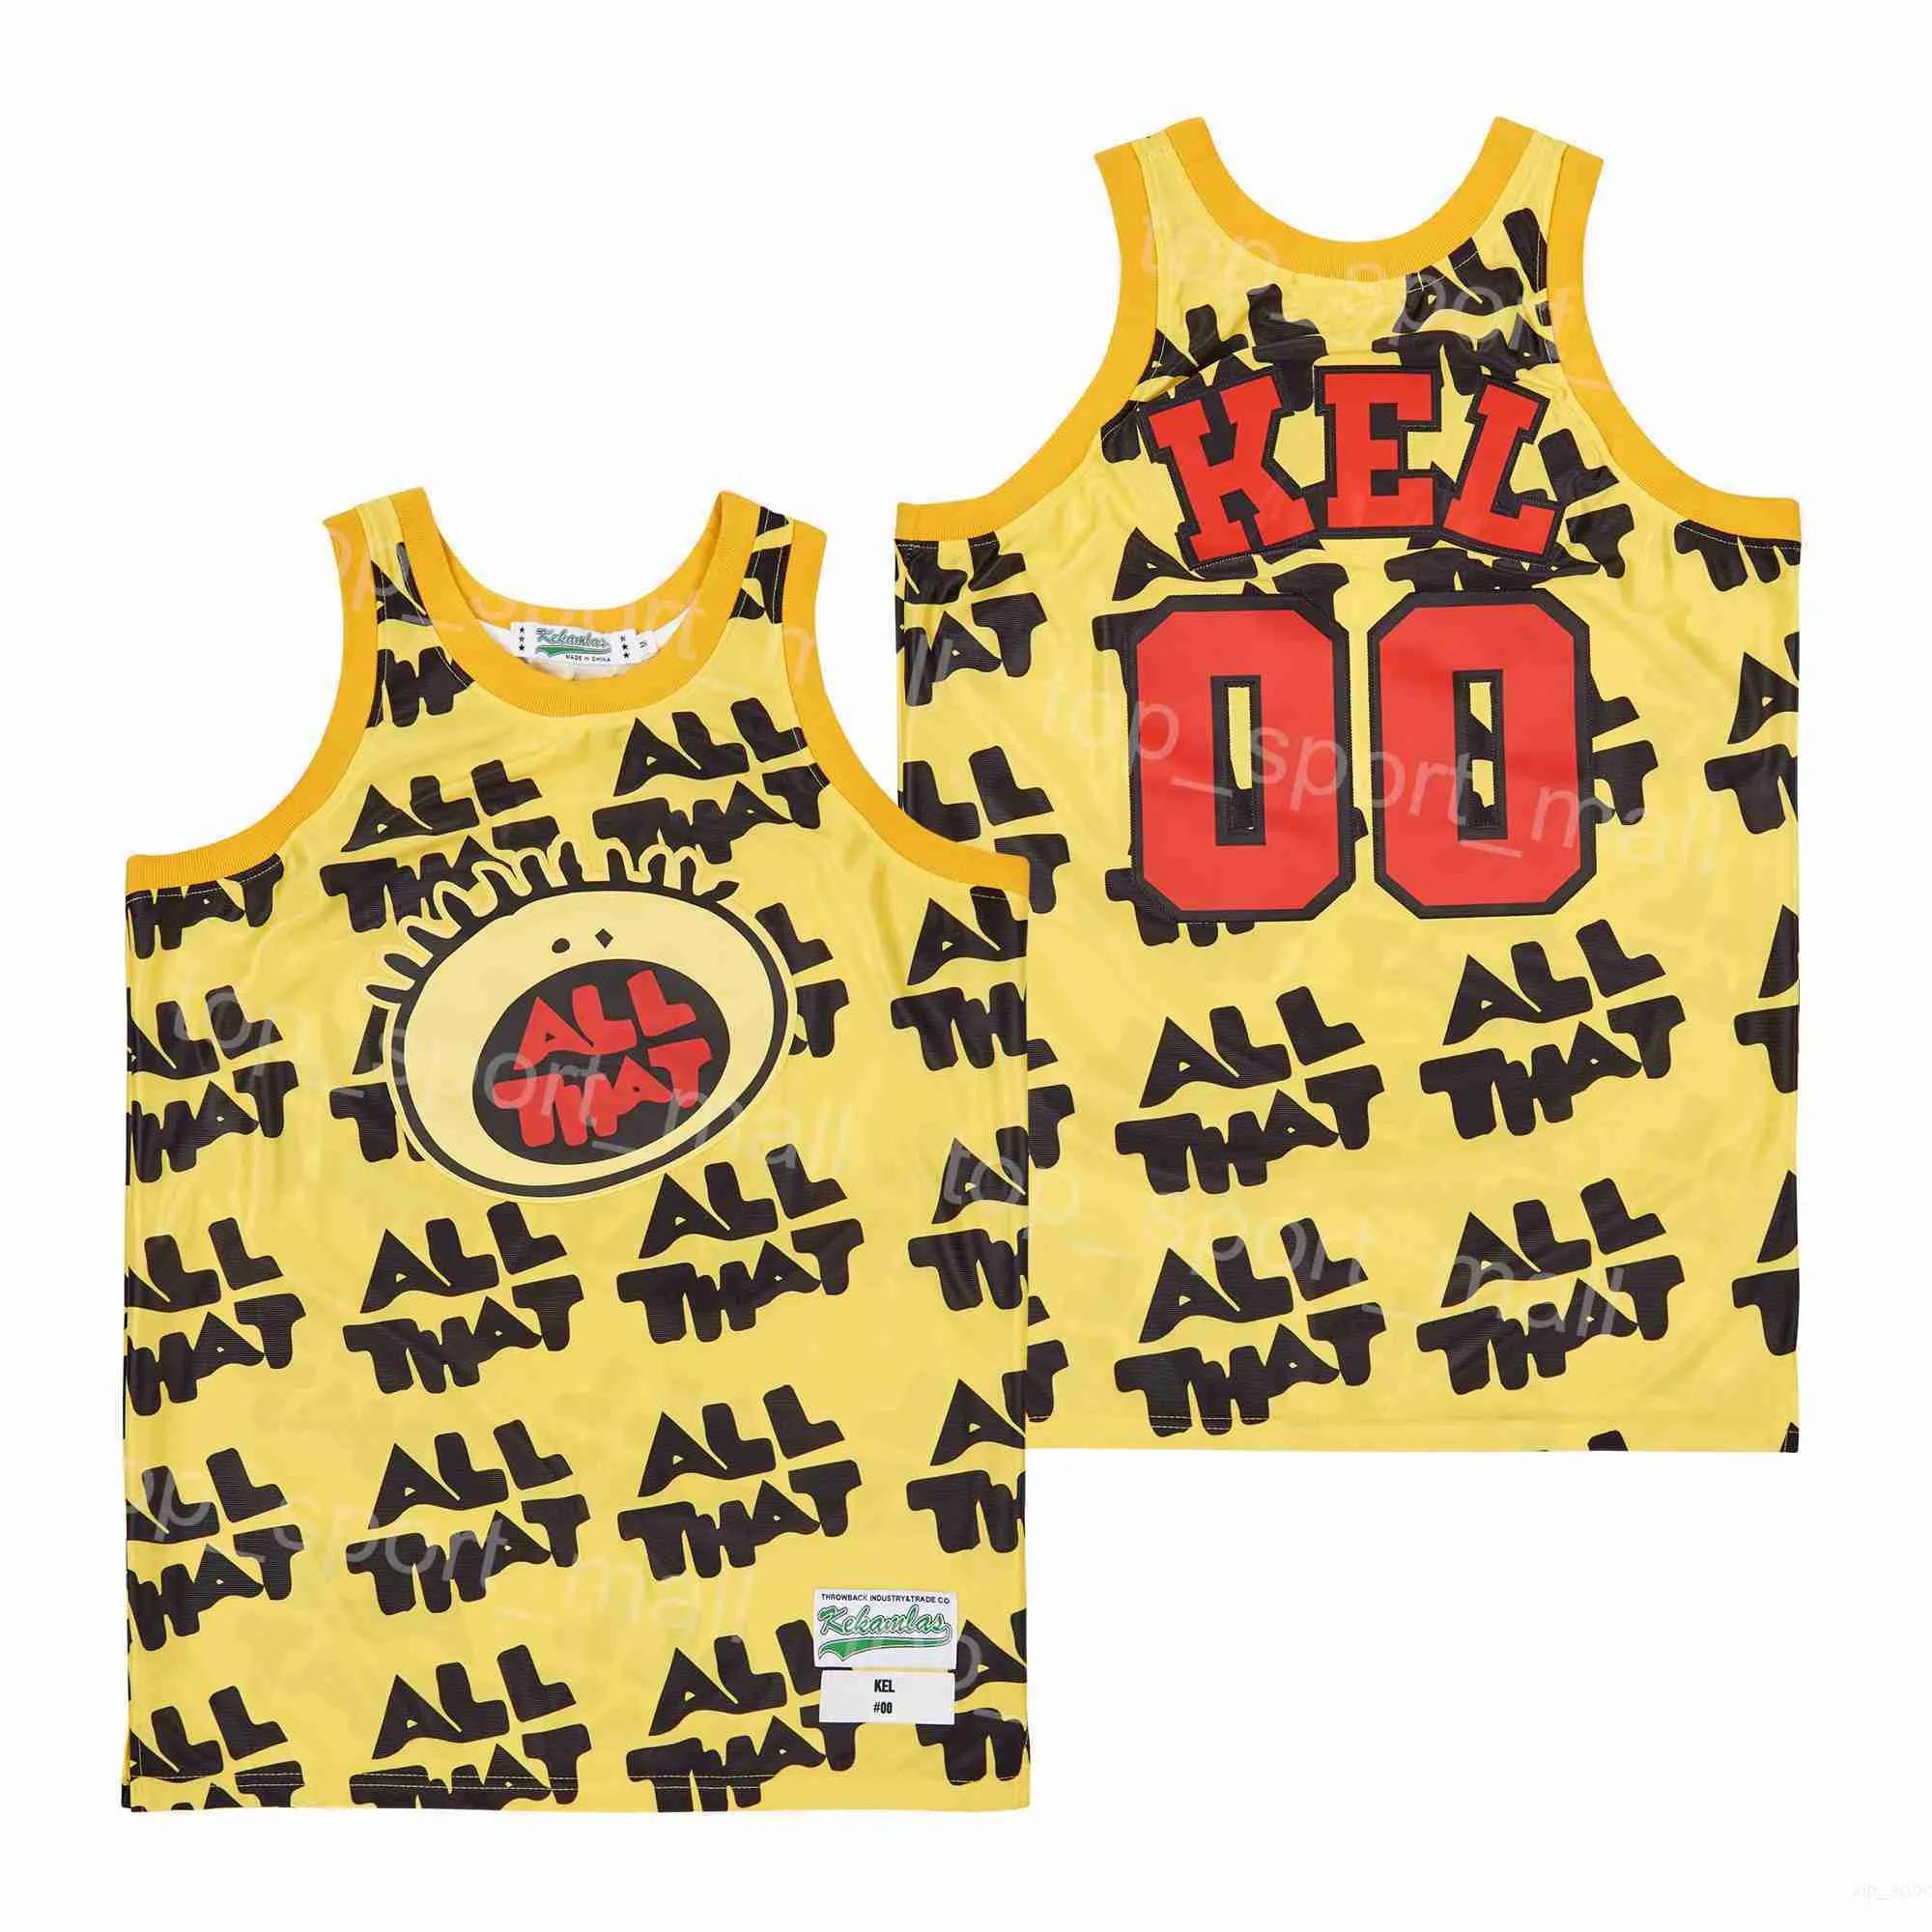 Movie Basketball Film All That 00 Kel Jerseys Mitchell TV Series show Summer STRIPED HipHop For Sport Fans Breathable Team Color Yellow Pure Cotton University High